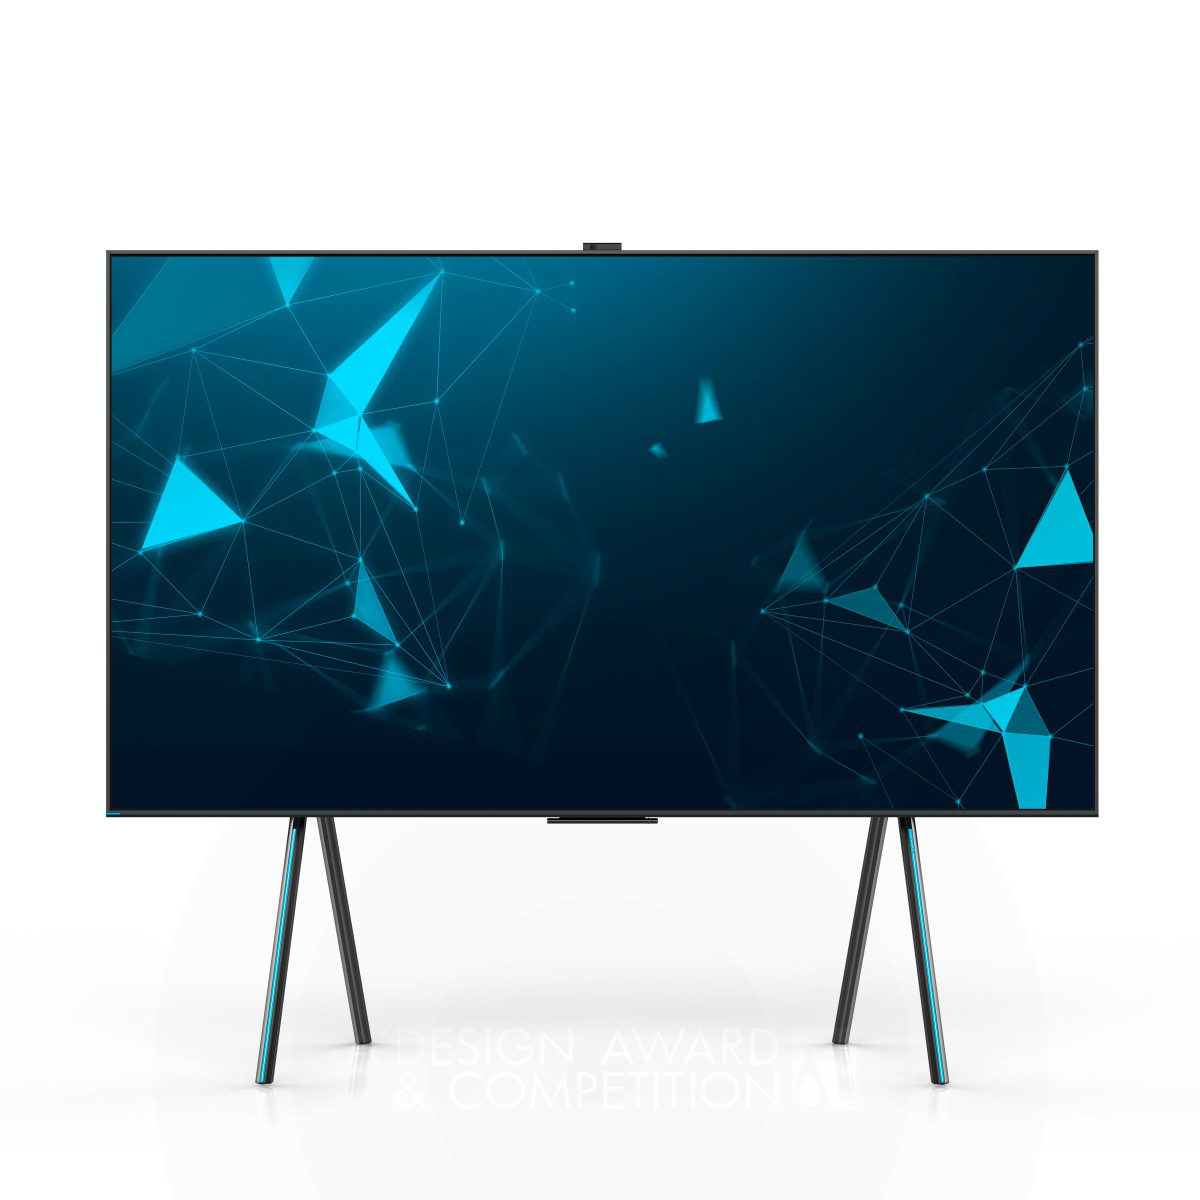 A6Pro Series Miniled TV by Konka Industrial Design Team